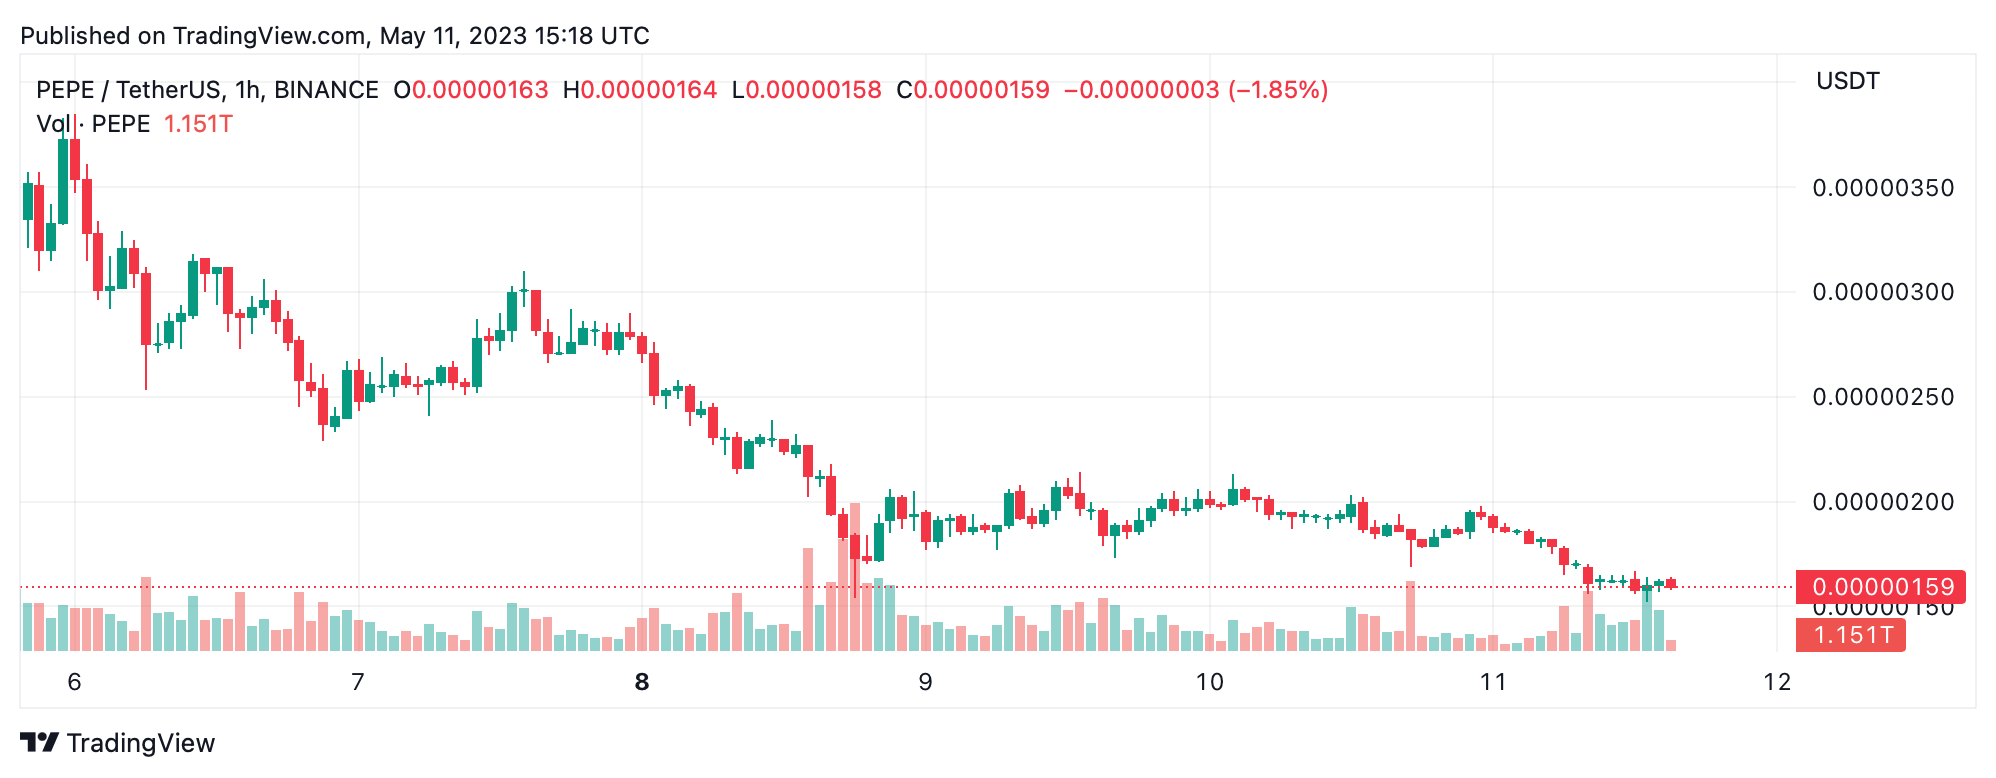 PEPE Token Continues Downward Spiral, Registers 60% Drop From All-Time High